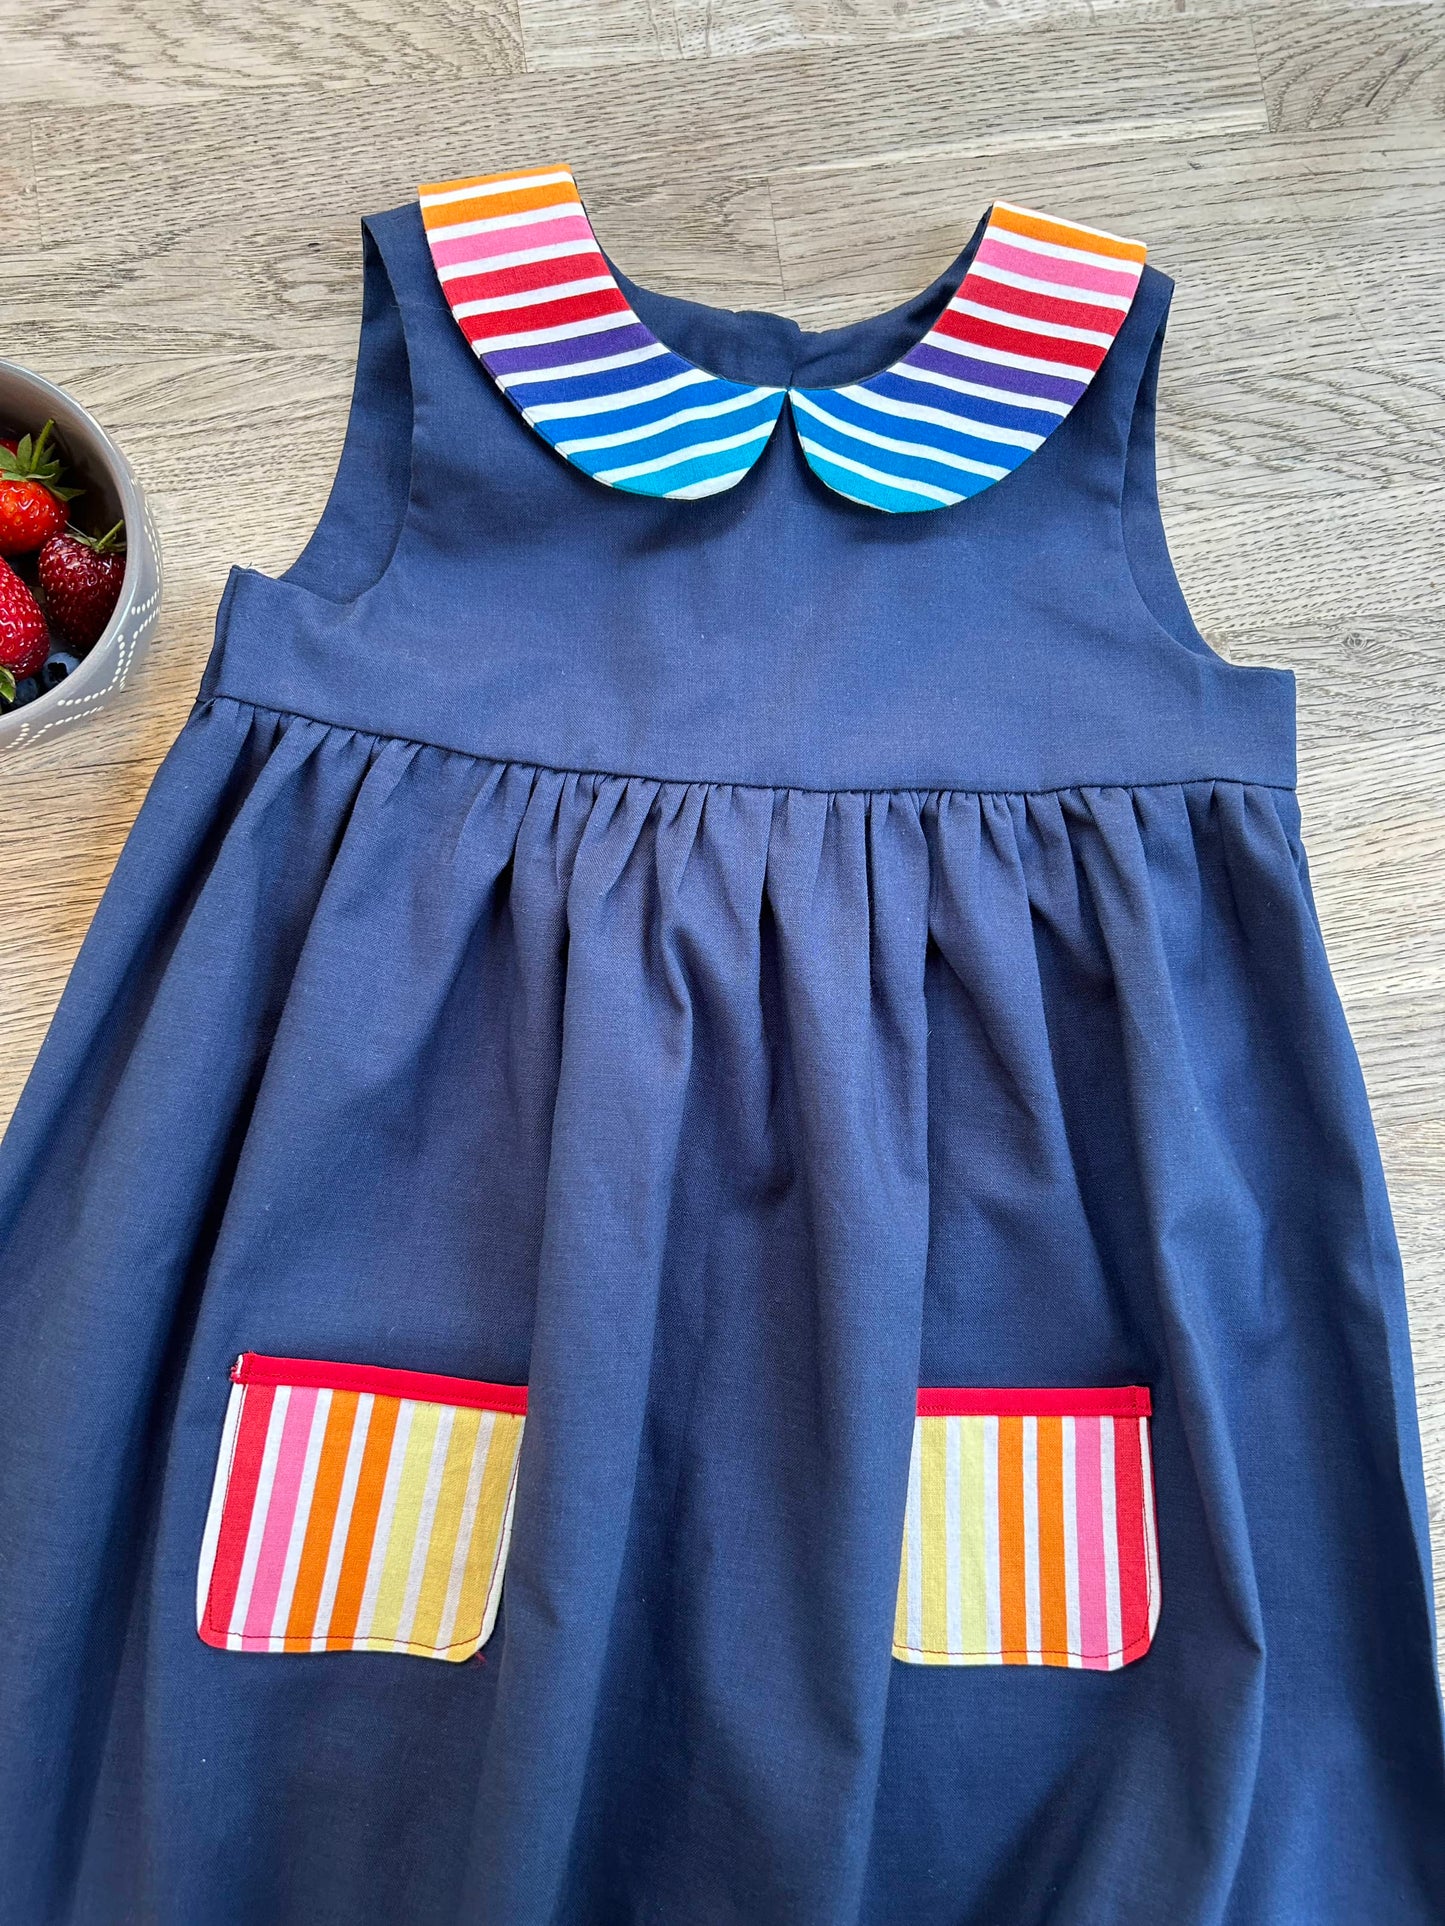 Blue Rainbow Dress with Peter Pan Collar and Rainbow Pockets (MADE TO ORDER)